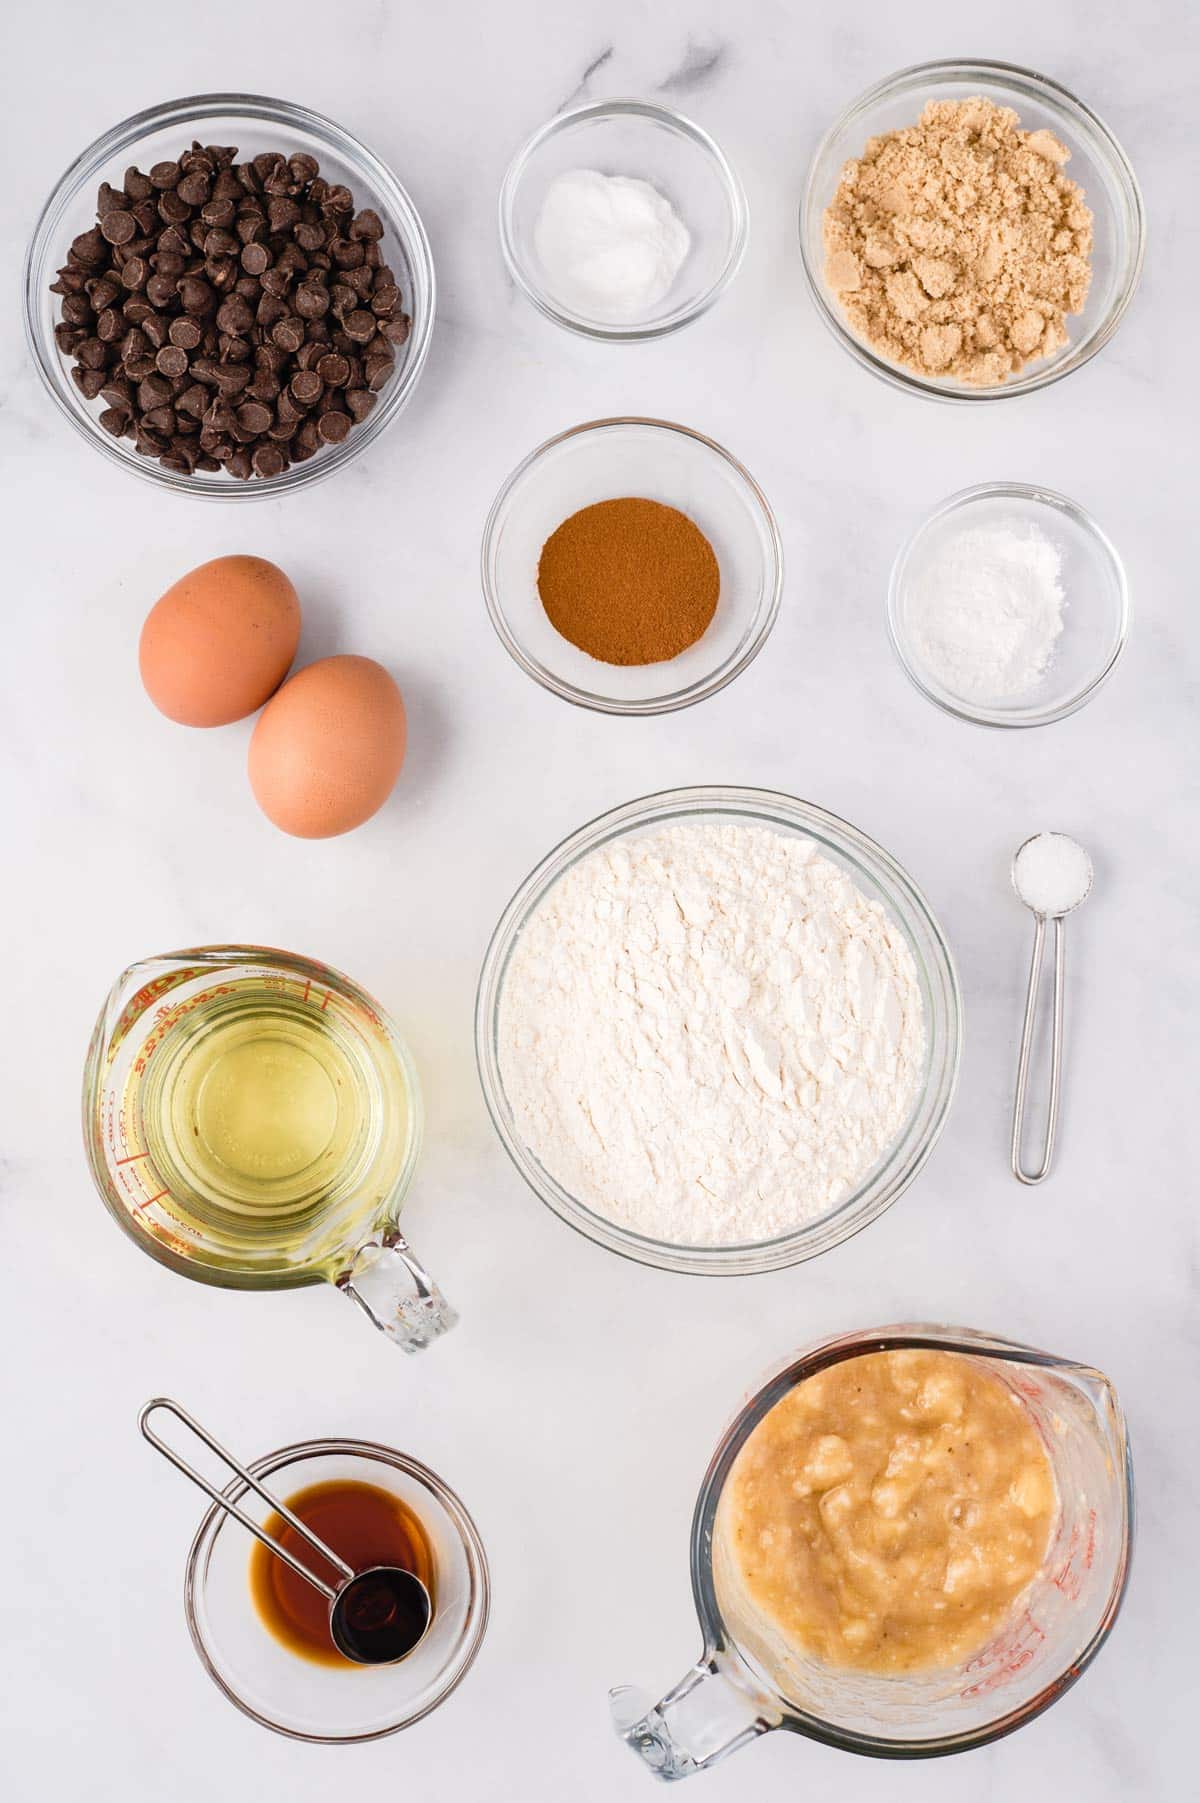 ingredients for the muffins.